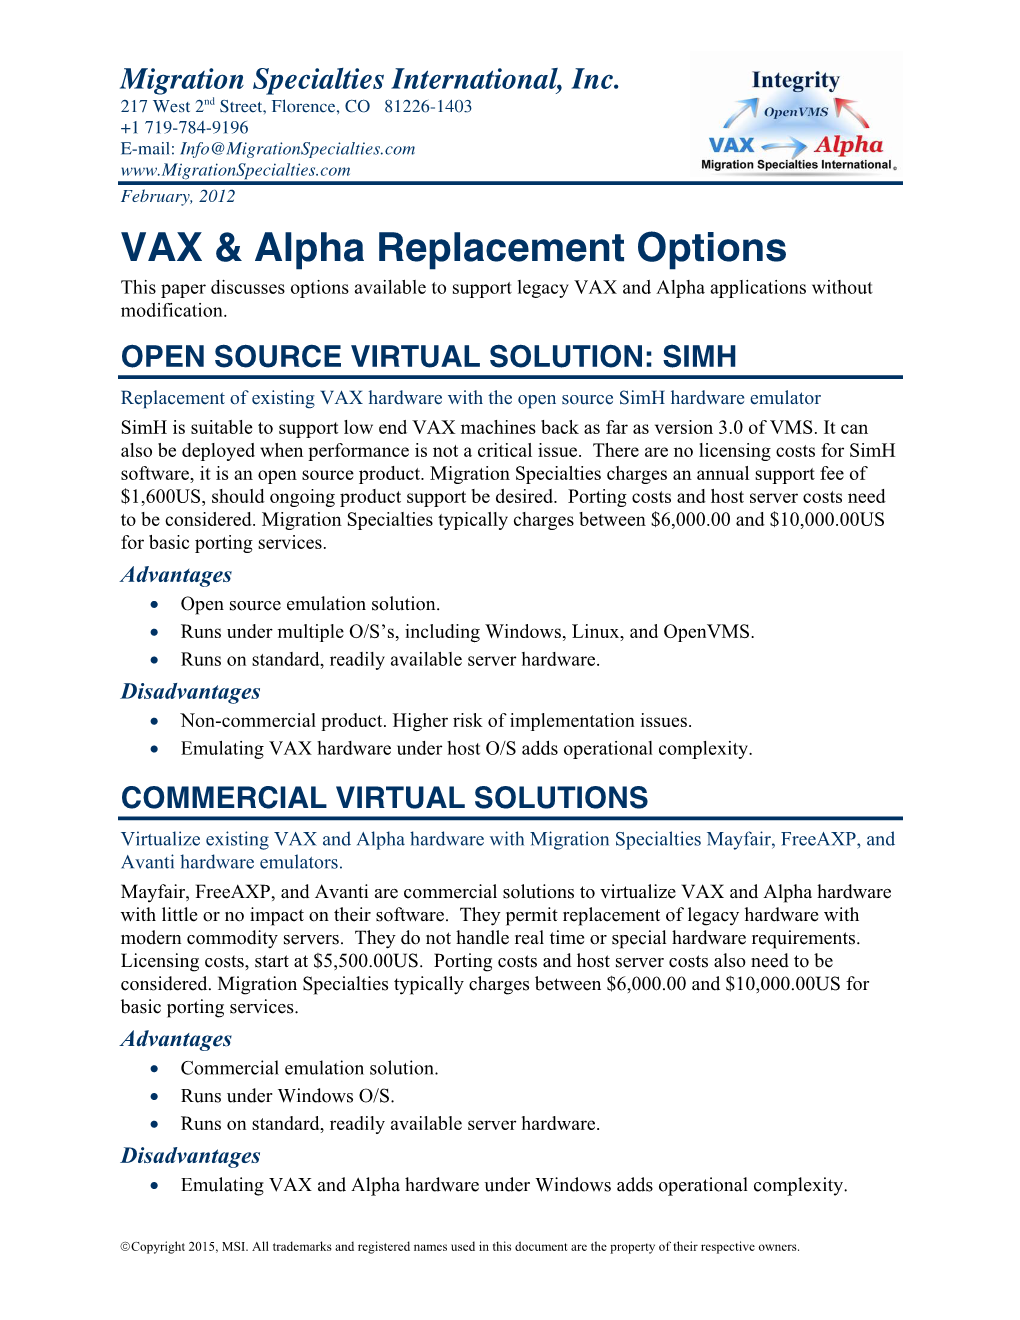 VAX & Alpha Replacement Options